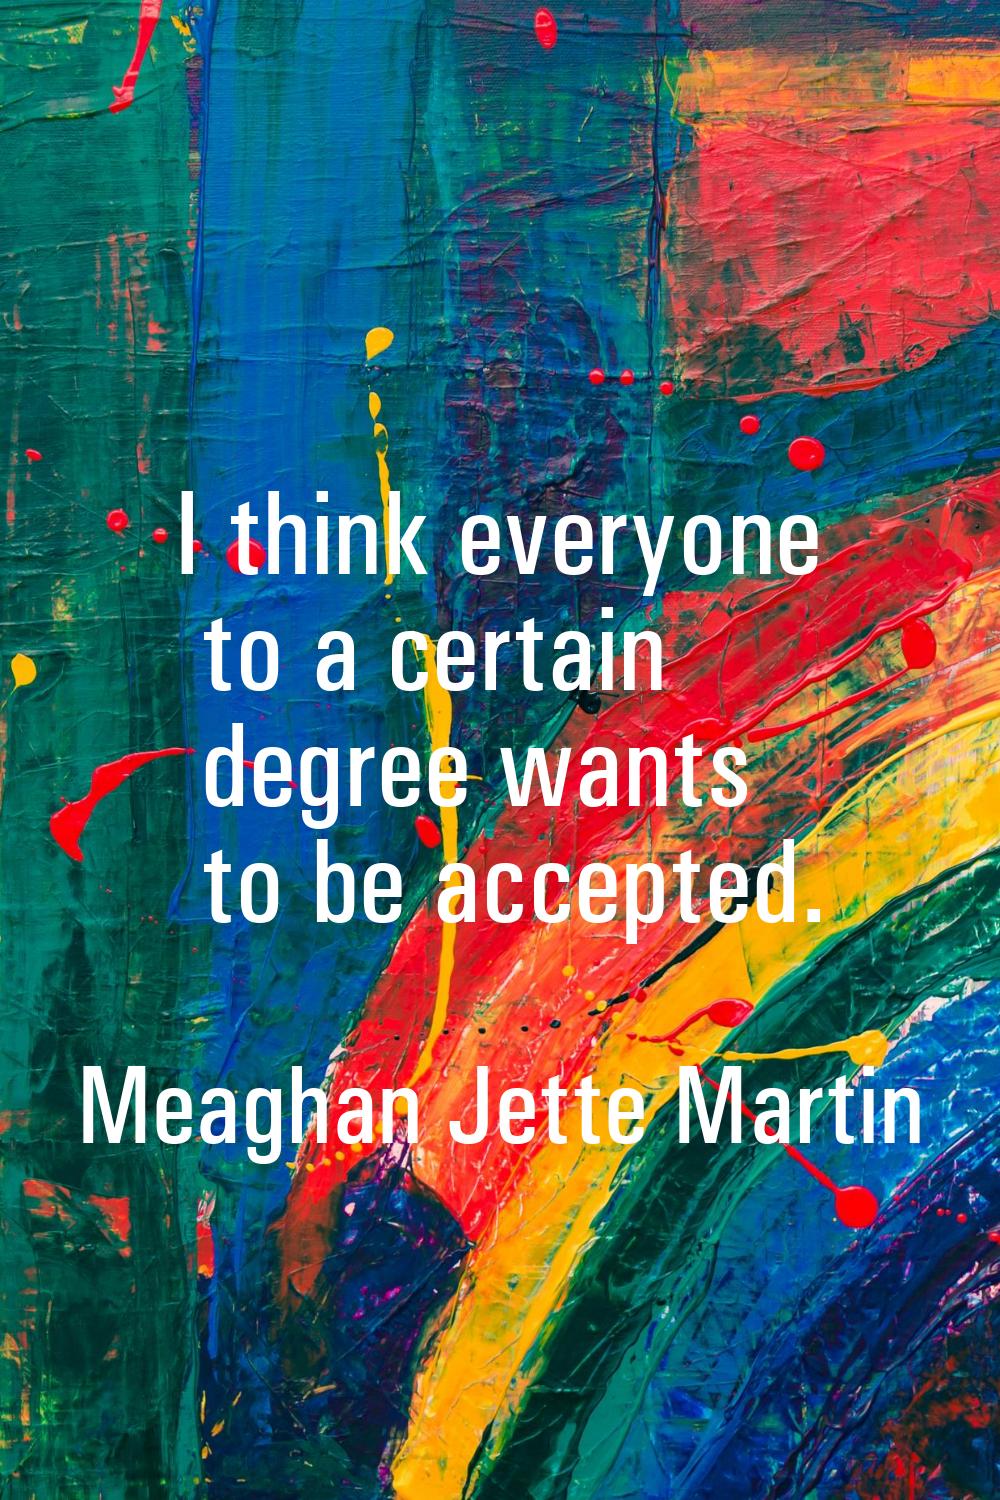 I think everyone to a certain degree wants to be accepted.